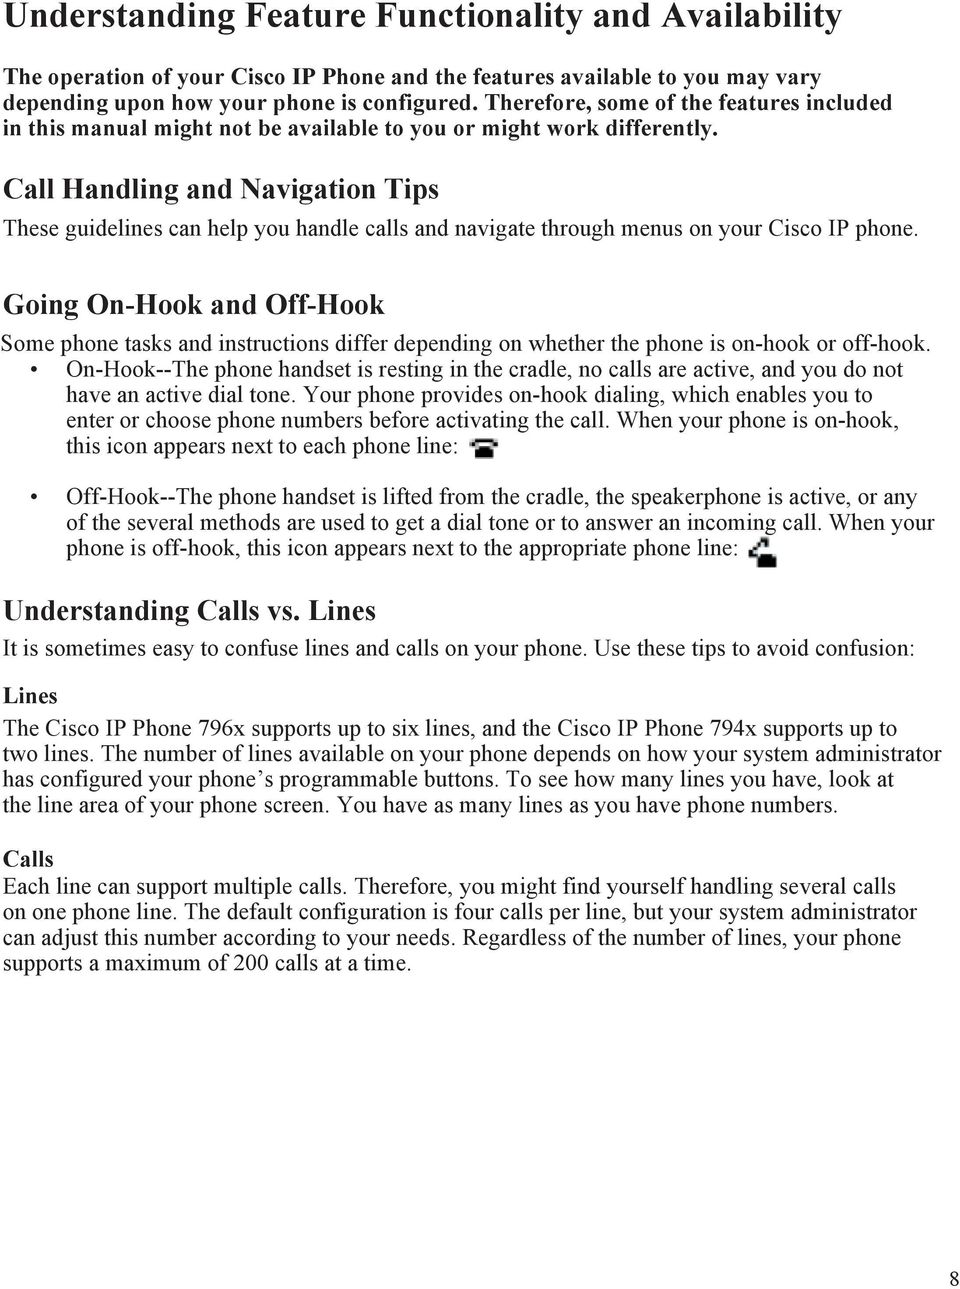 Call Handling and Navigation Tips These guidelines can help you handle calls and navigate through menus on your Cisco IP phone.